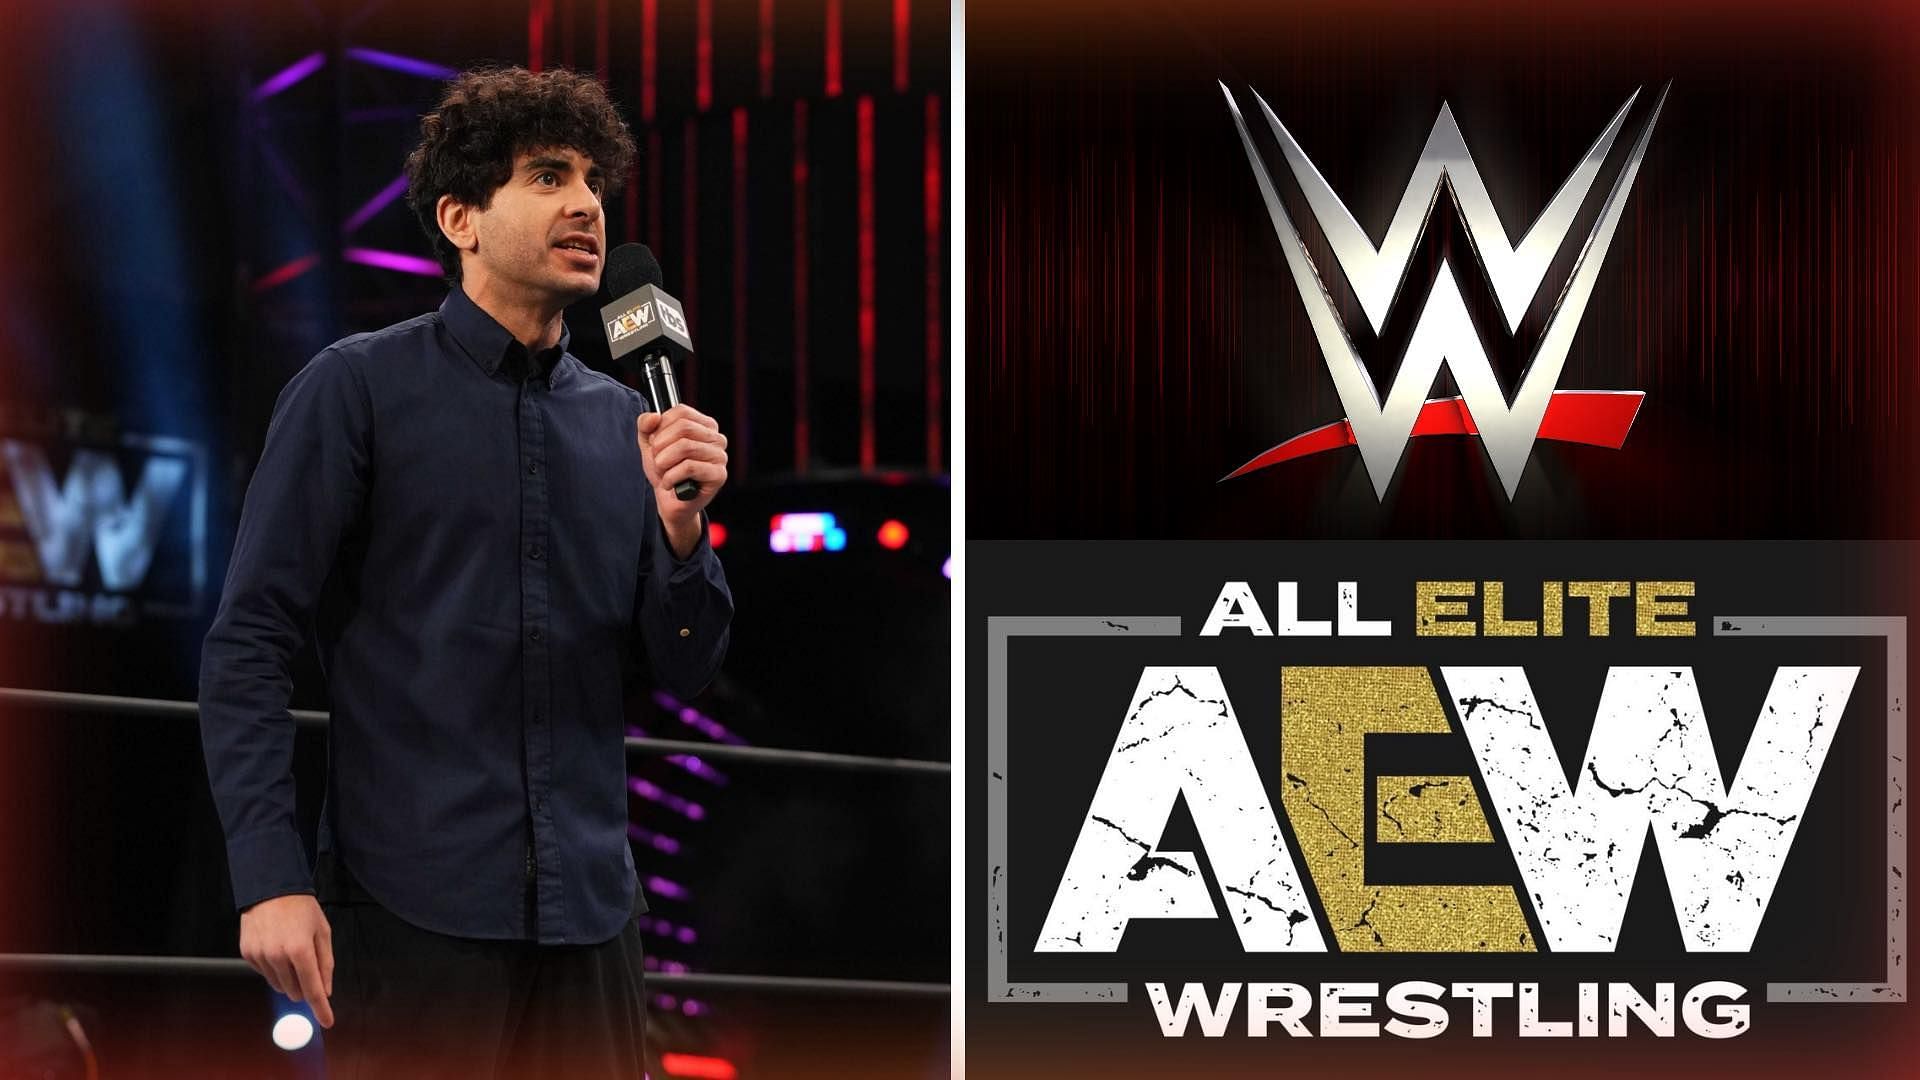 Tony Khan (left) and AEW and WWE logos (right).